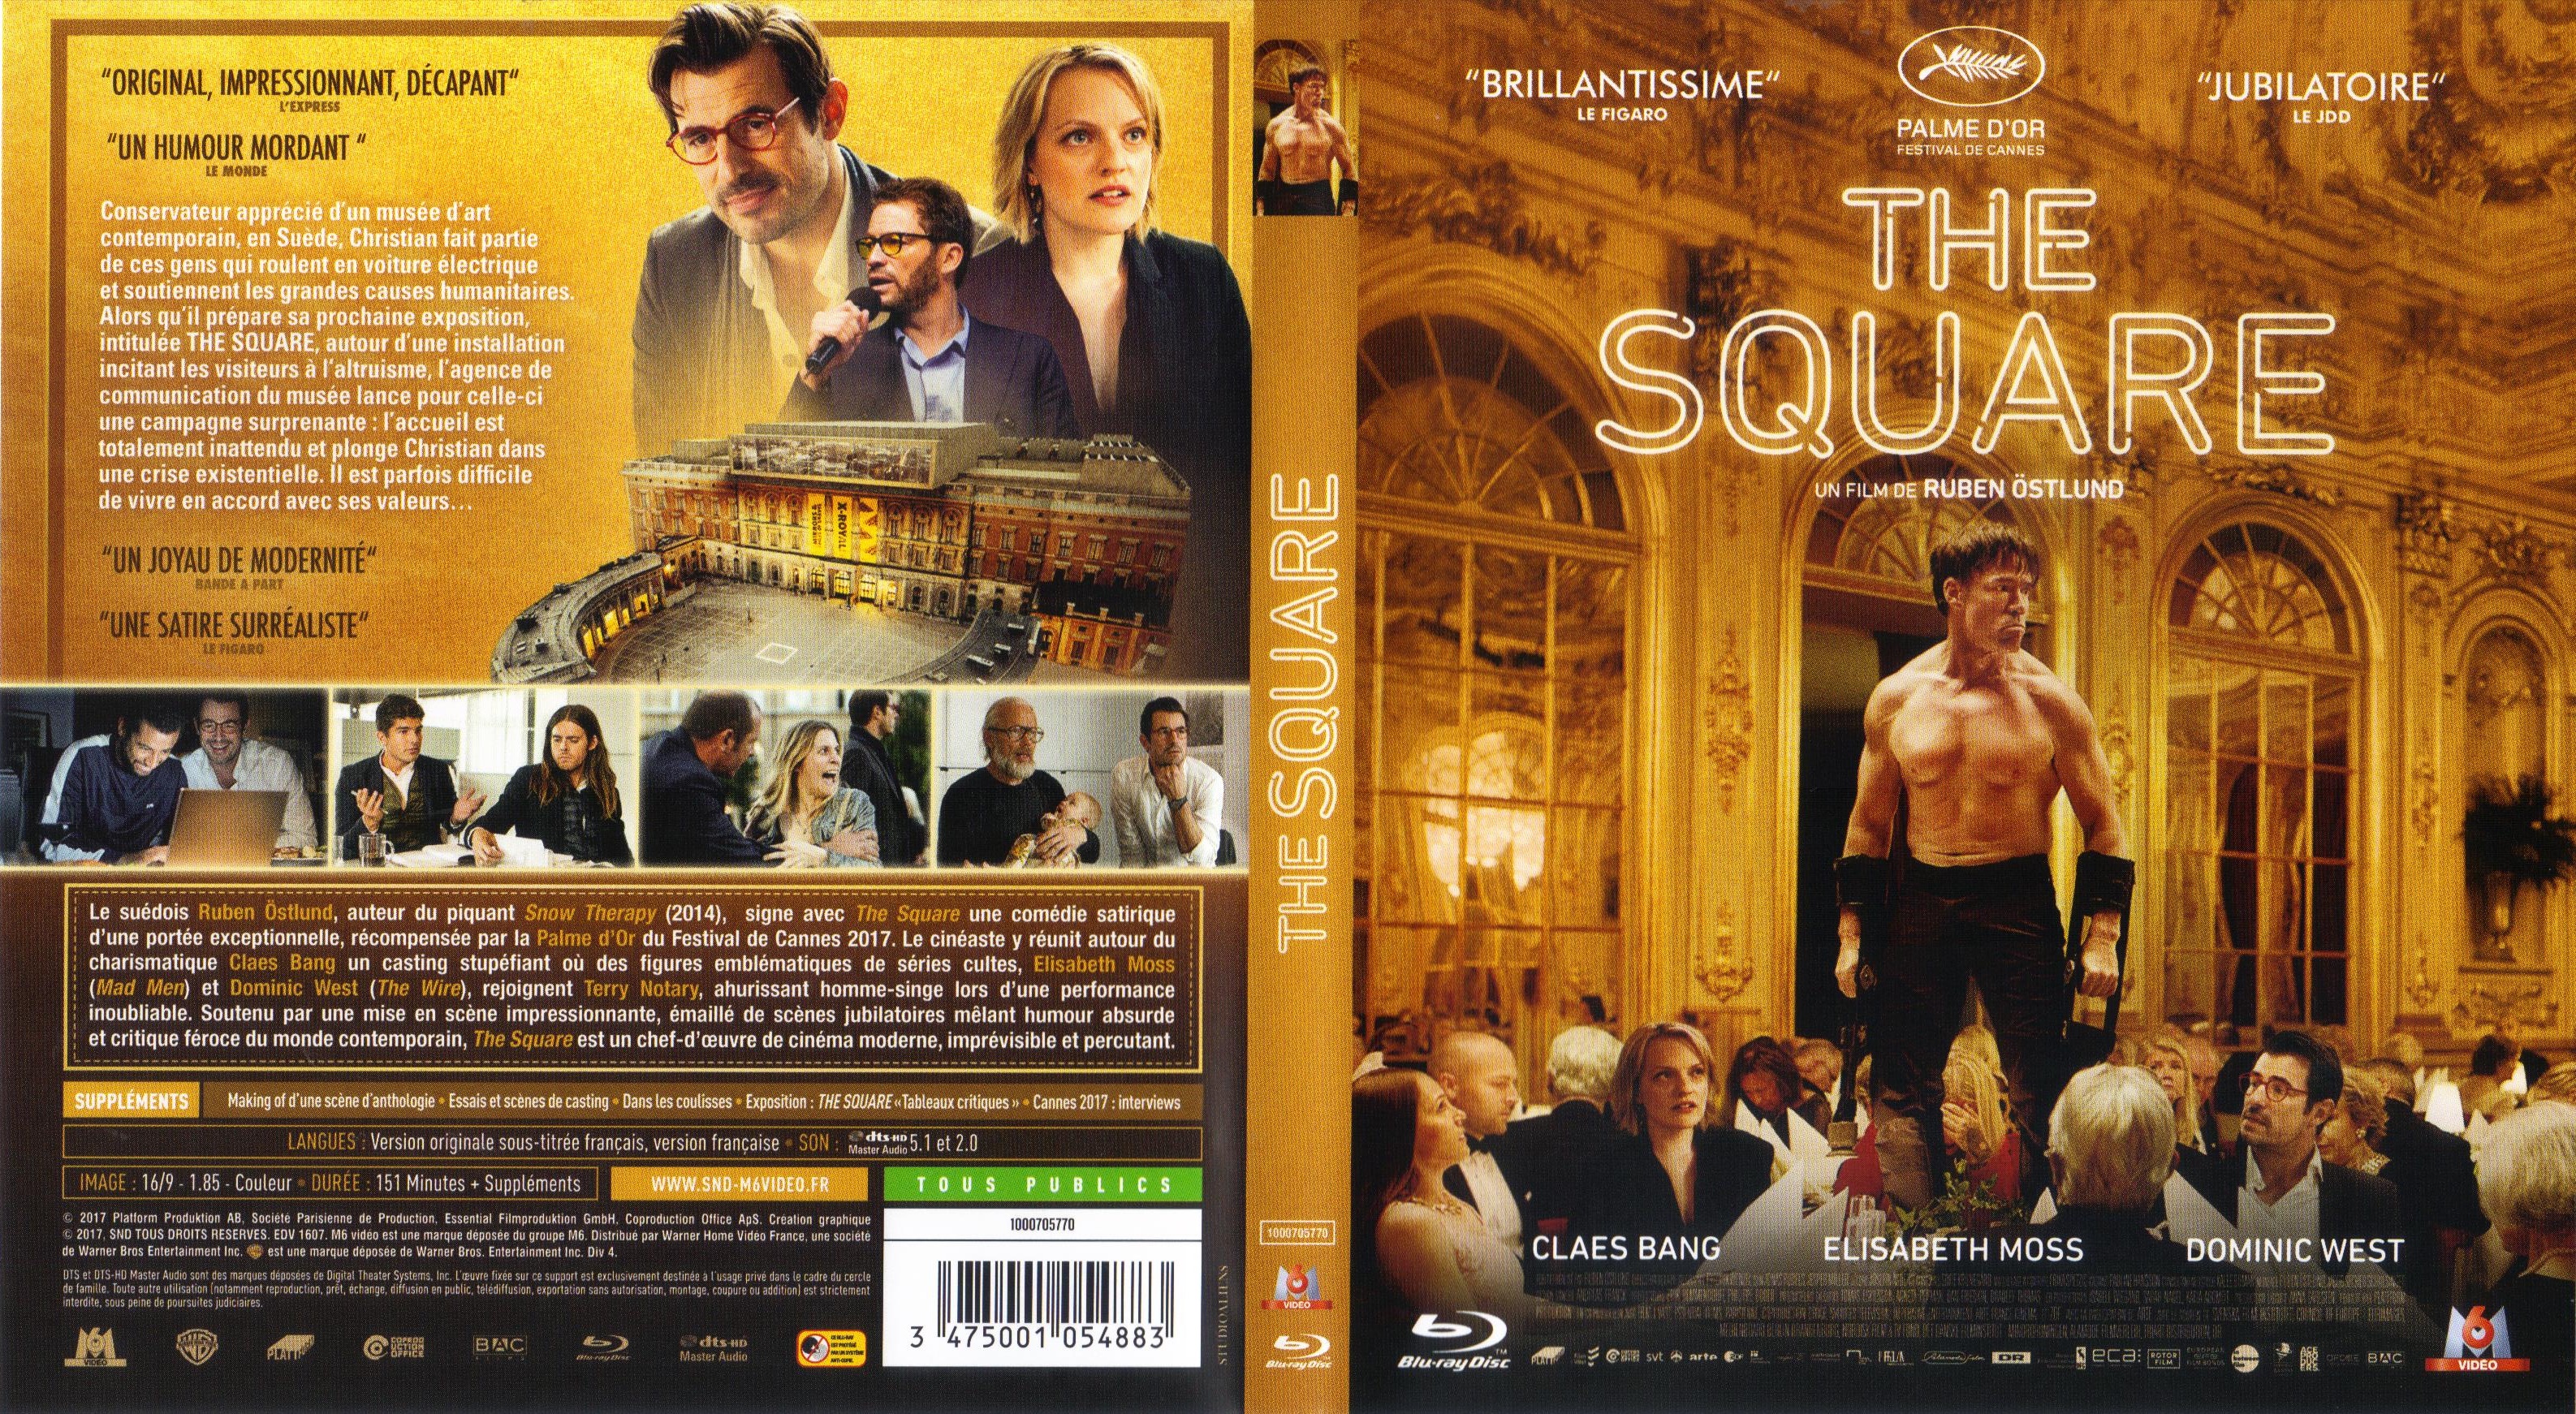 Jaquette DVD The square (2017) (BLU-RAY)